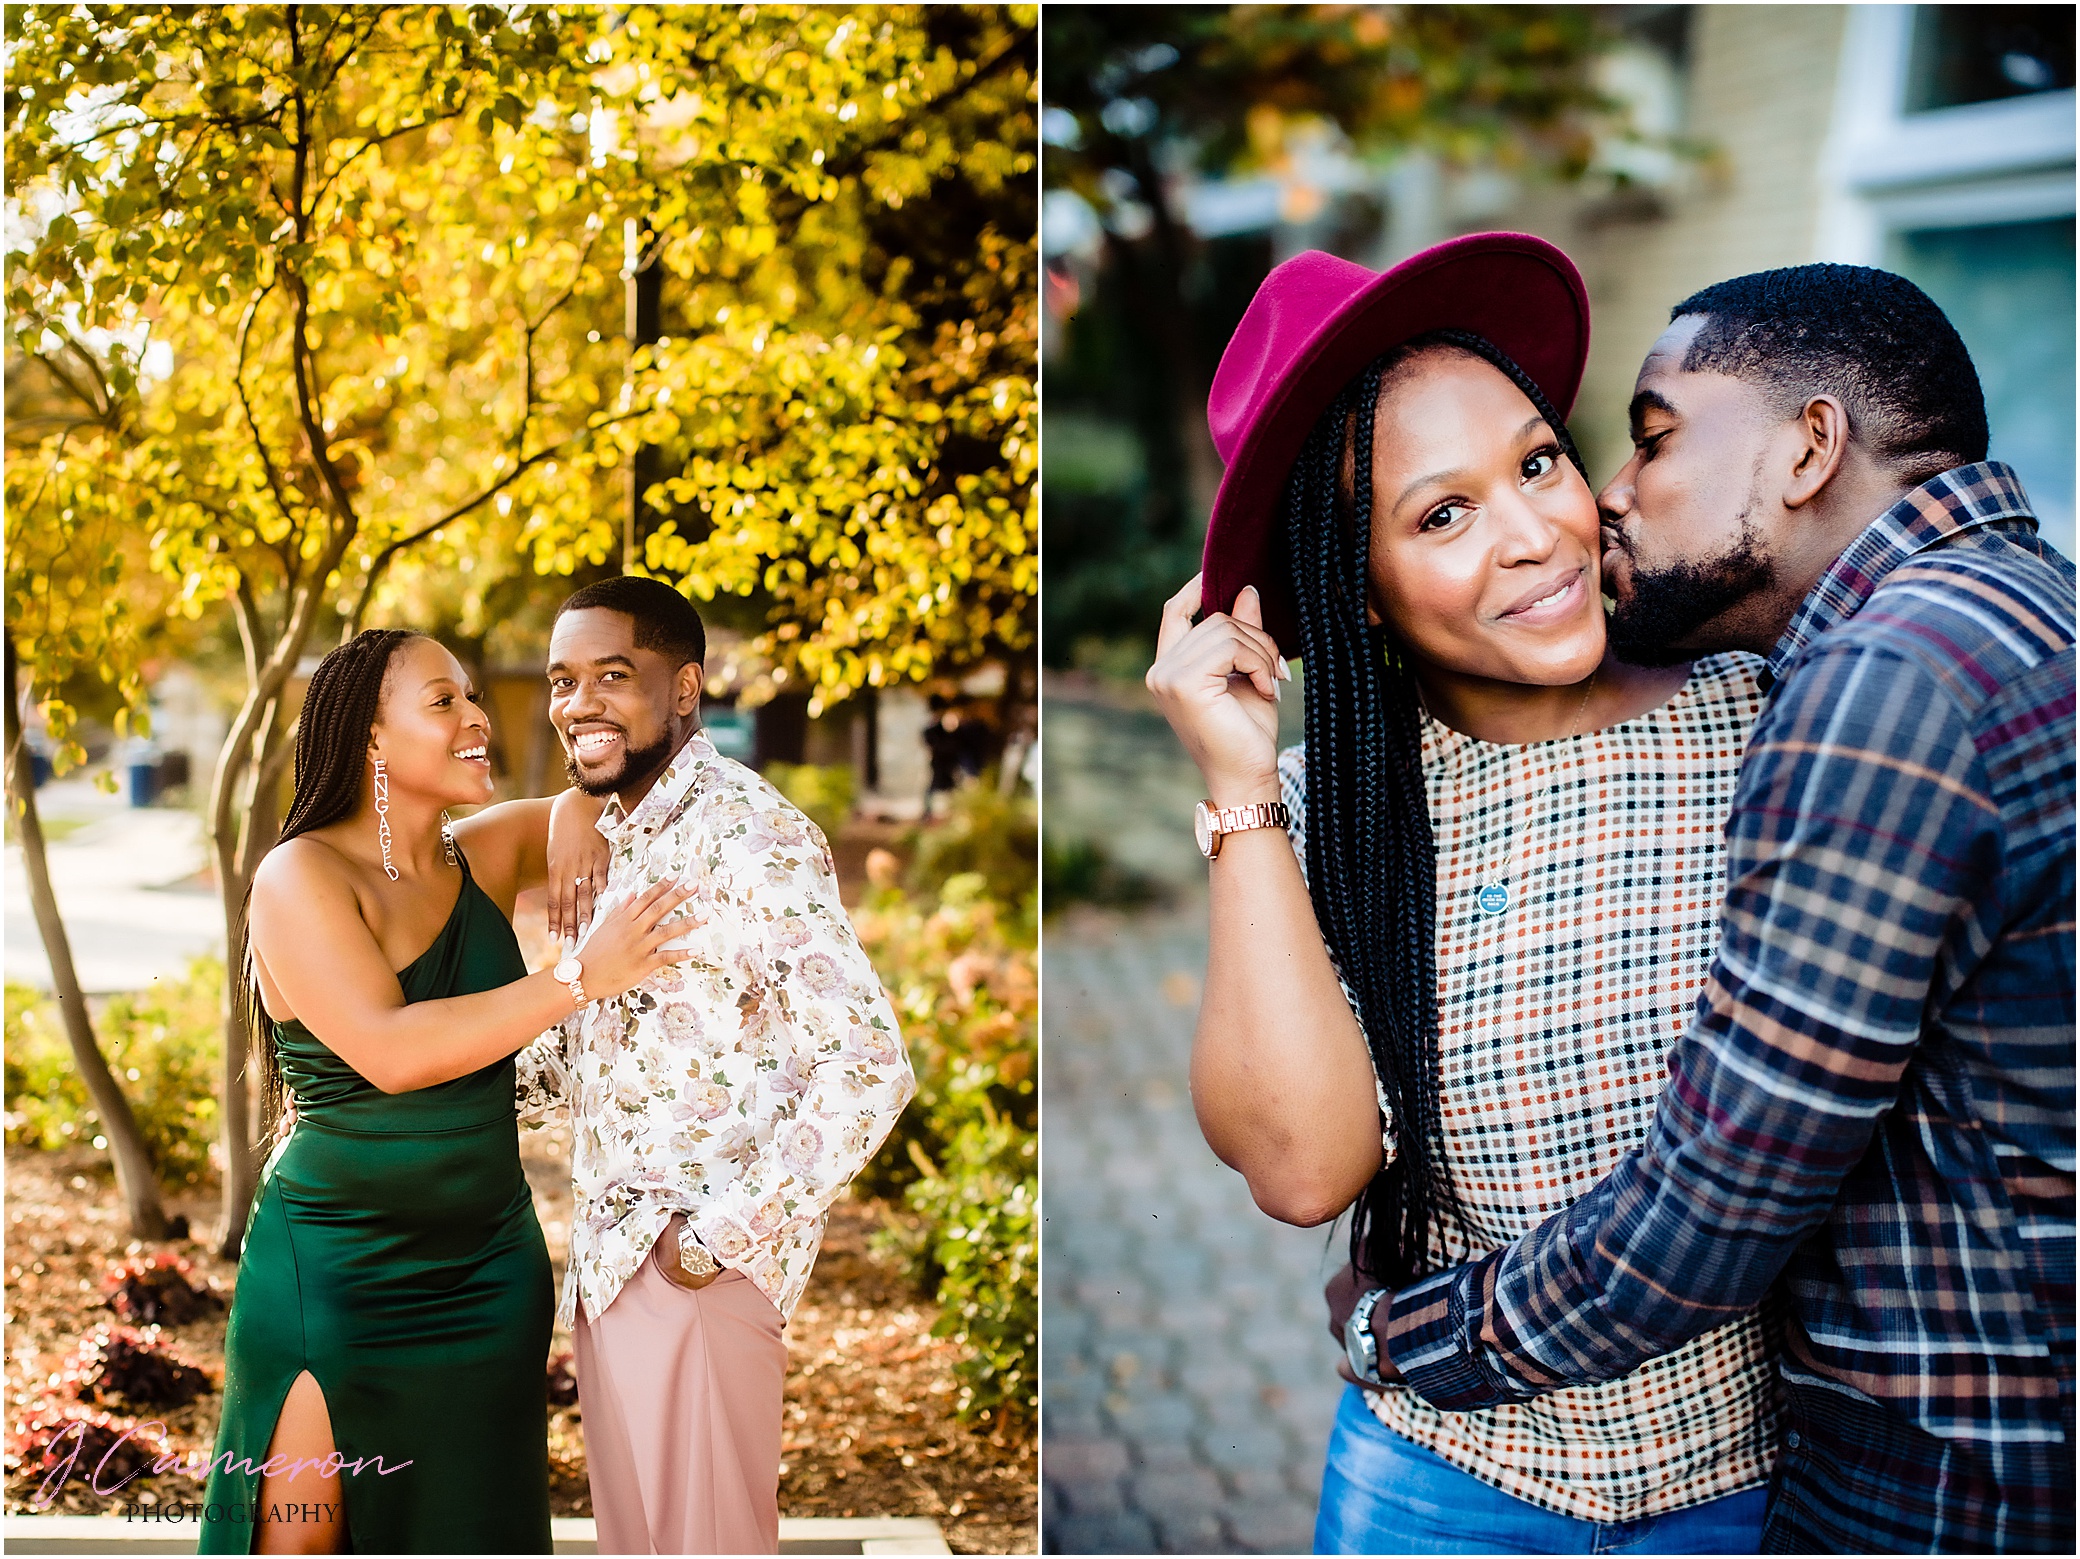 What to wear for your engagement session